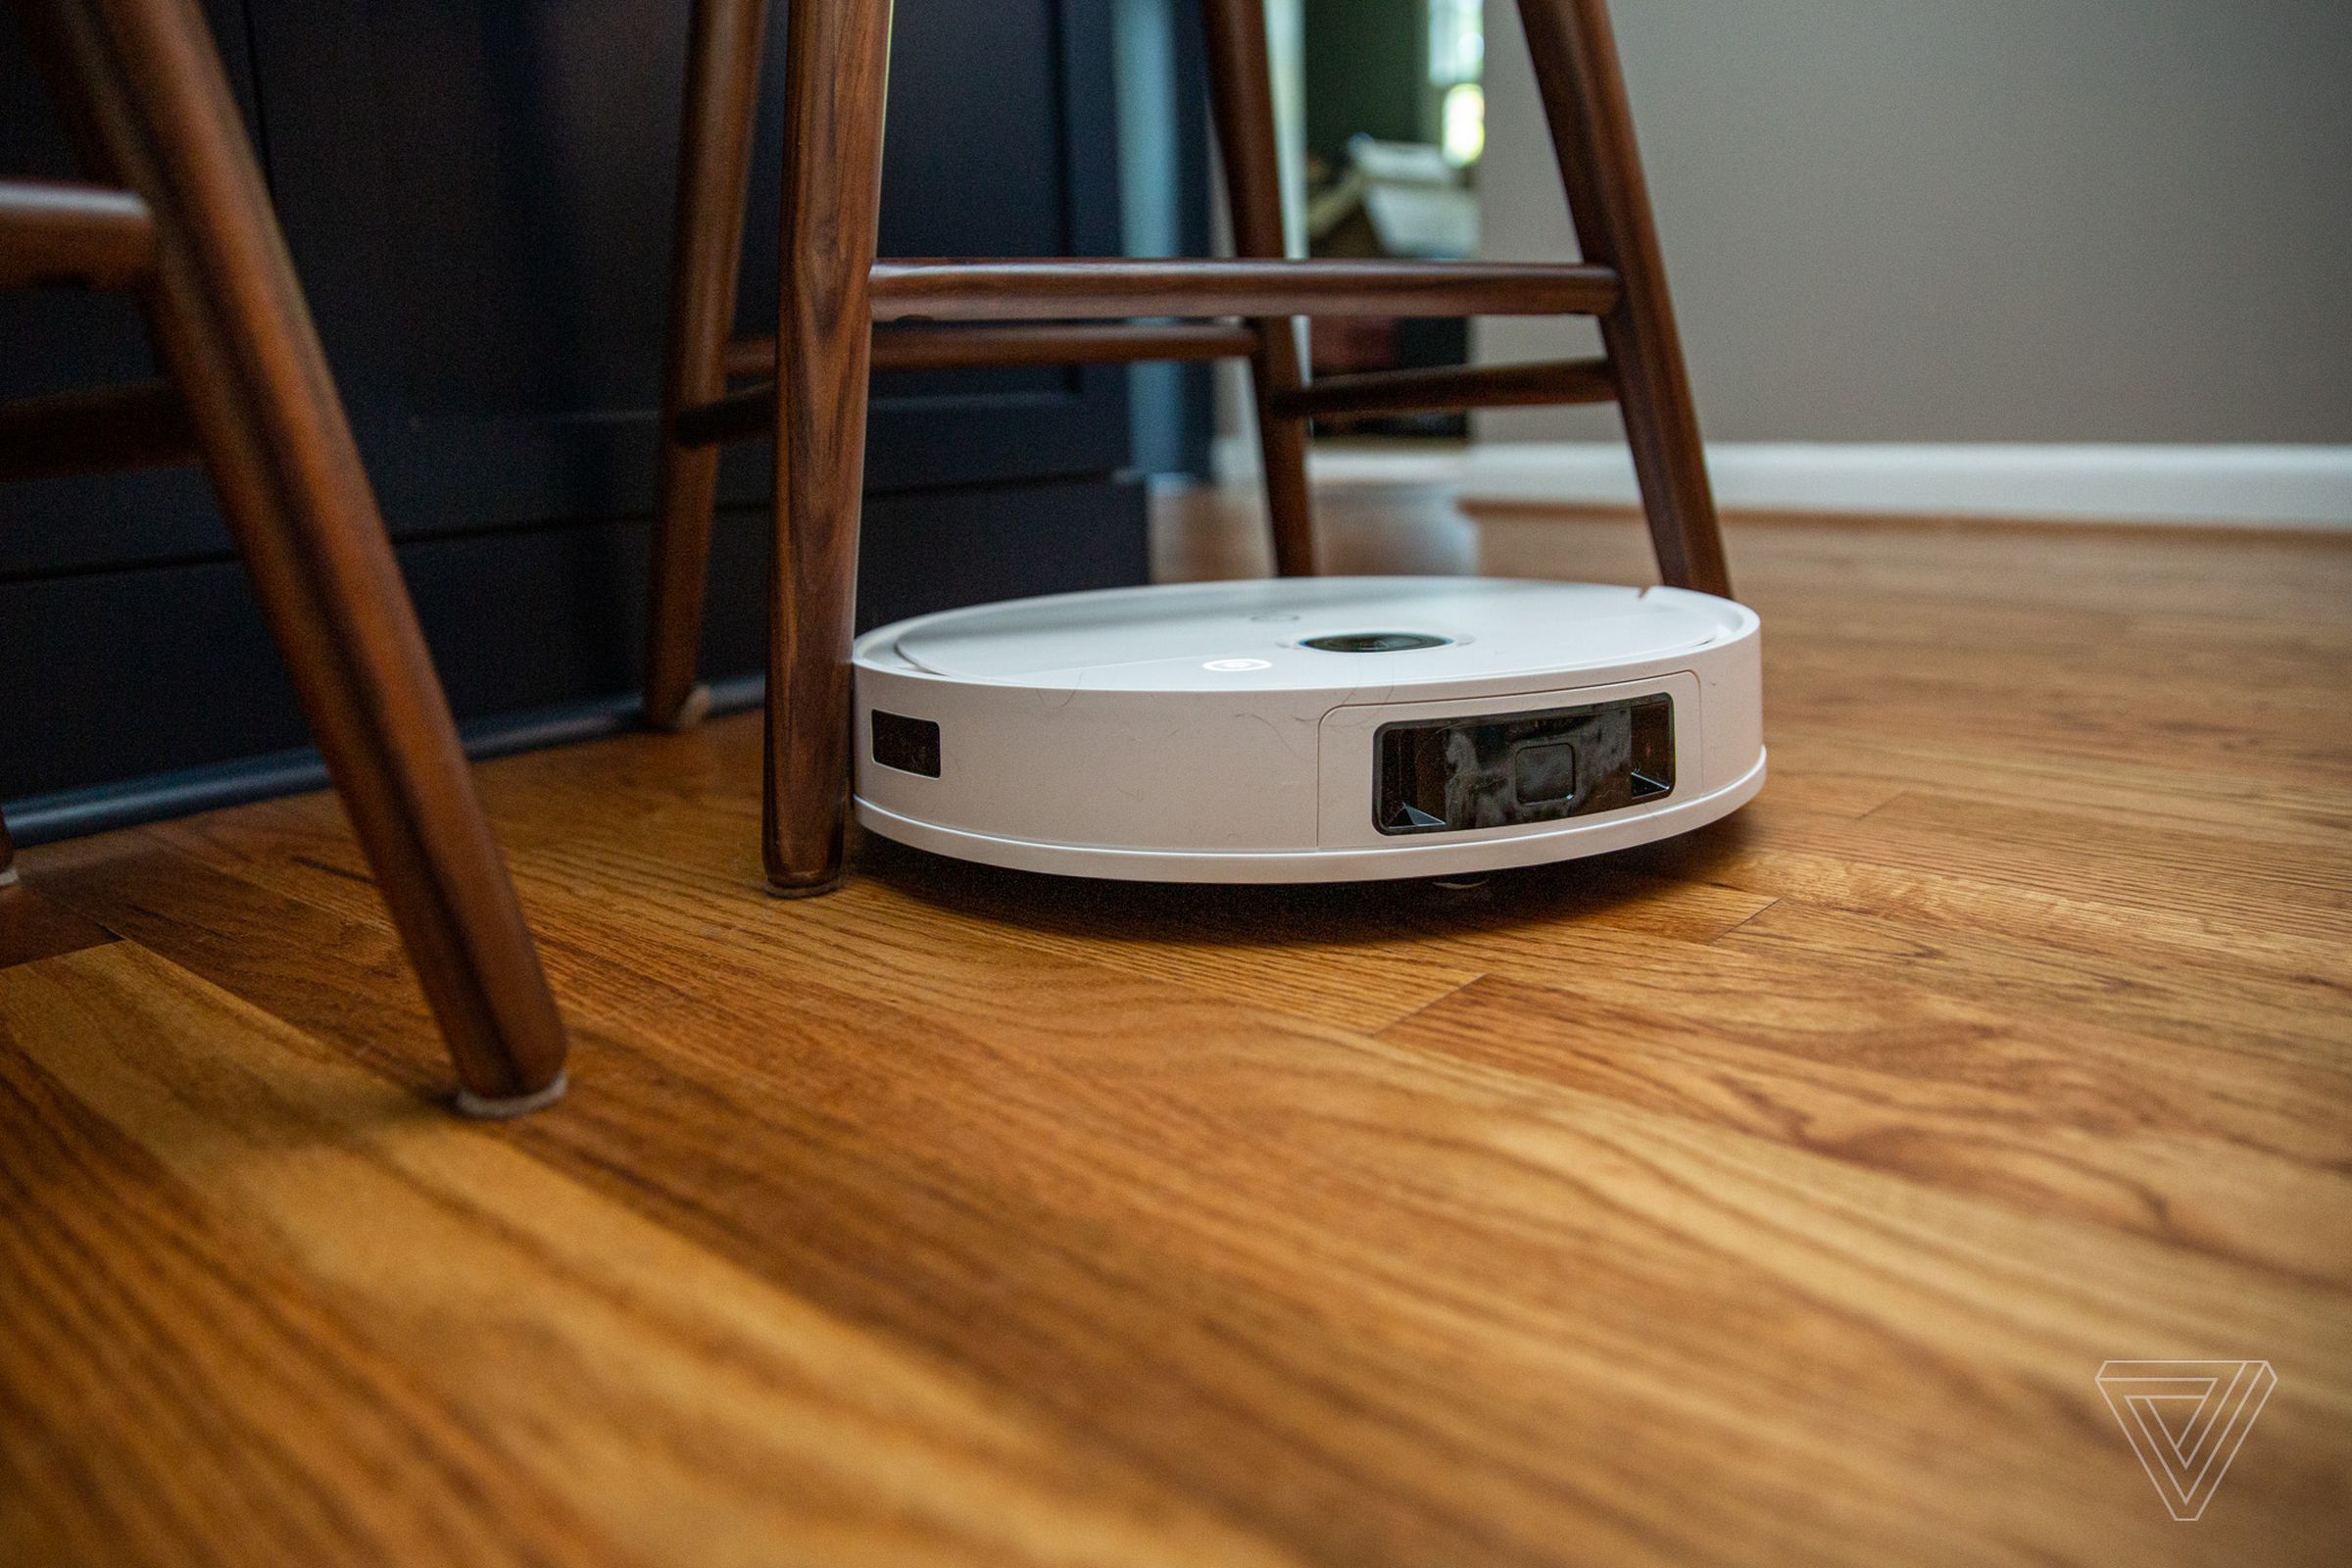 This robot vacuum is very efficient at navigating around furniture without knocking it over or getting stuck.